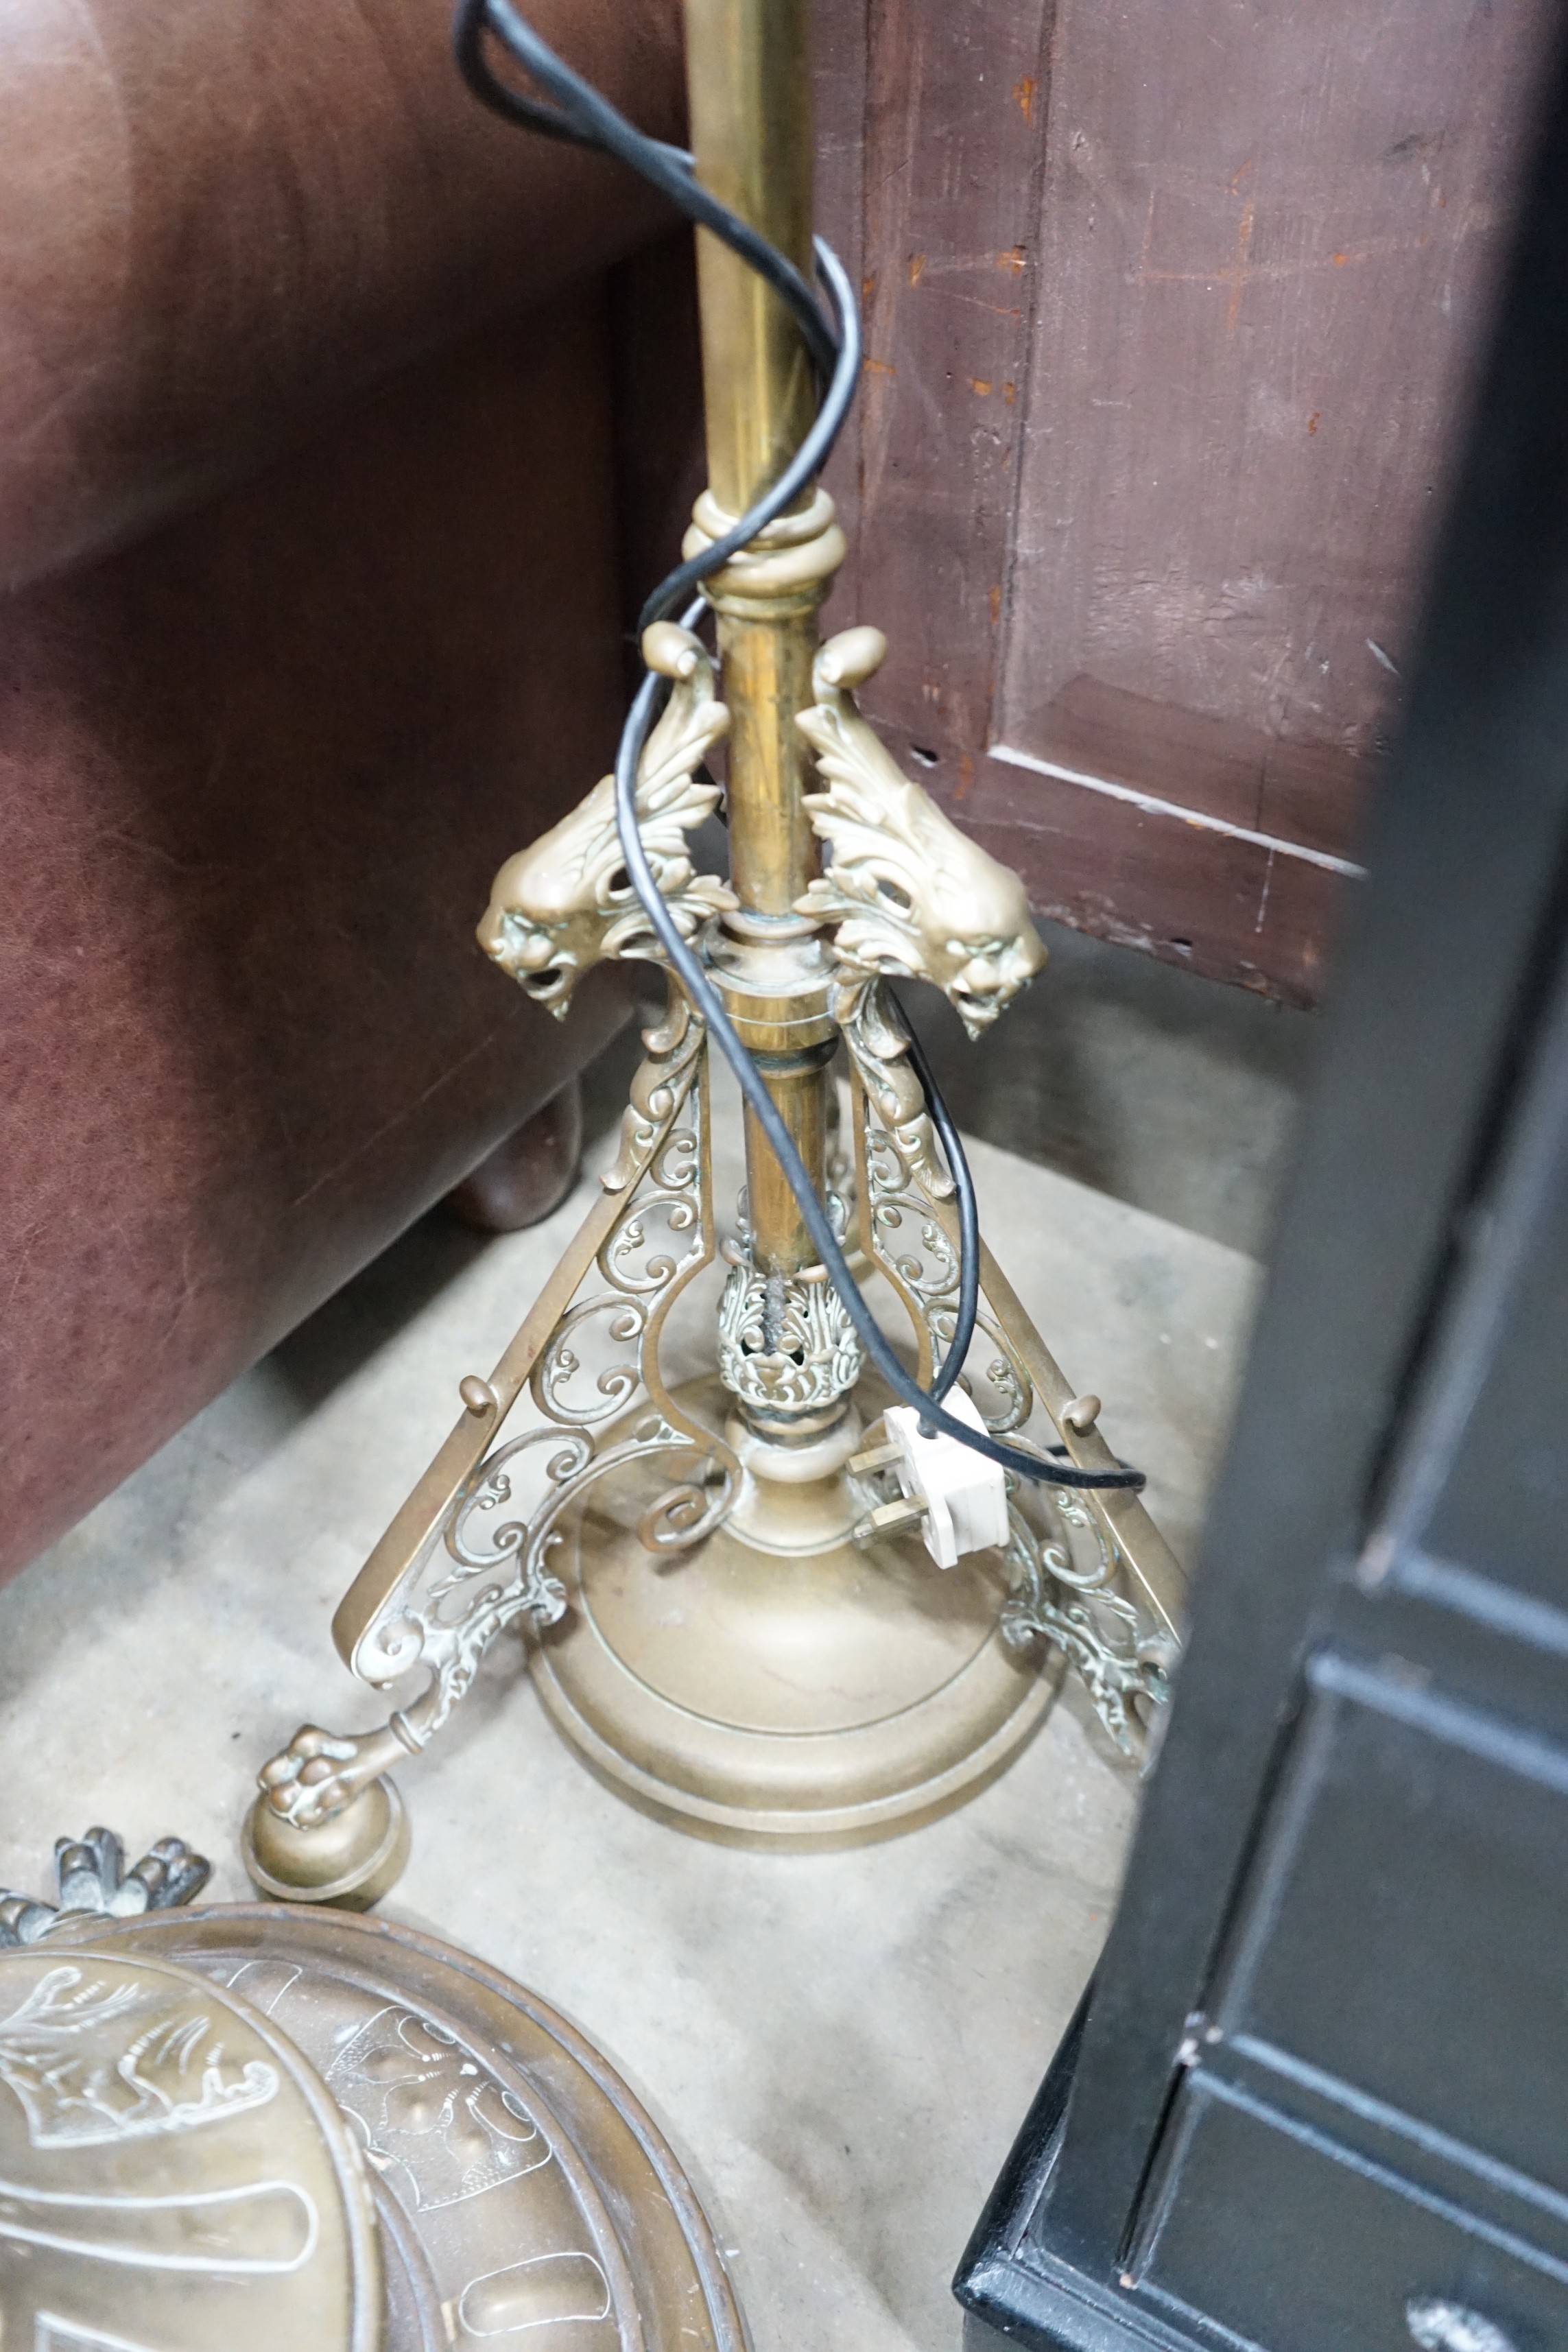 Two late 19th / early 20th century brass telescopic oil standard lamps converted to electricity.